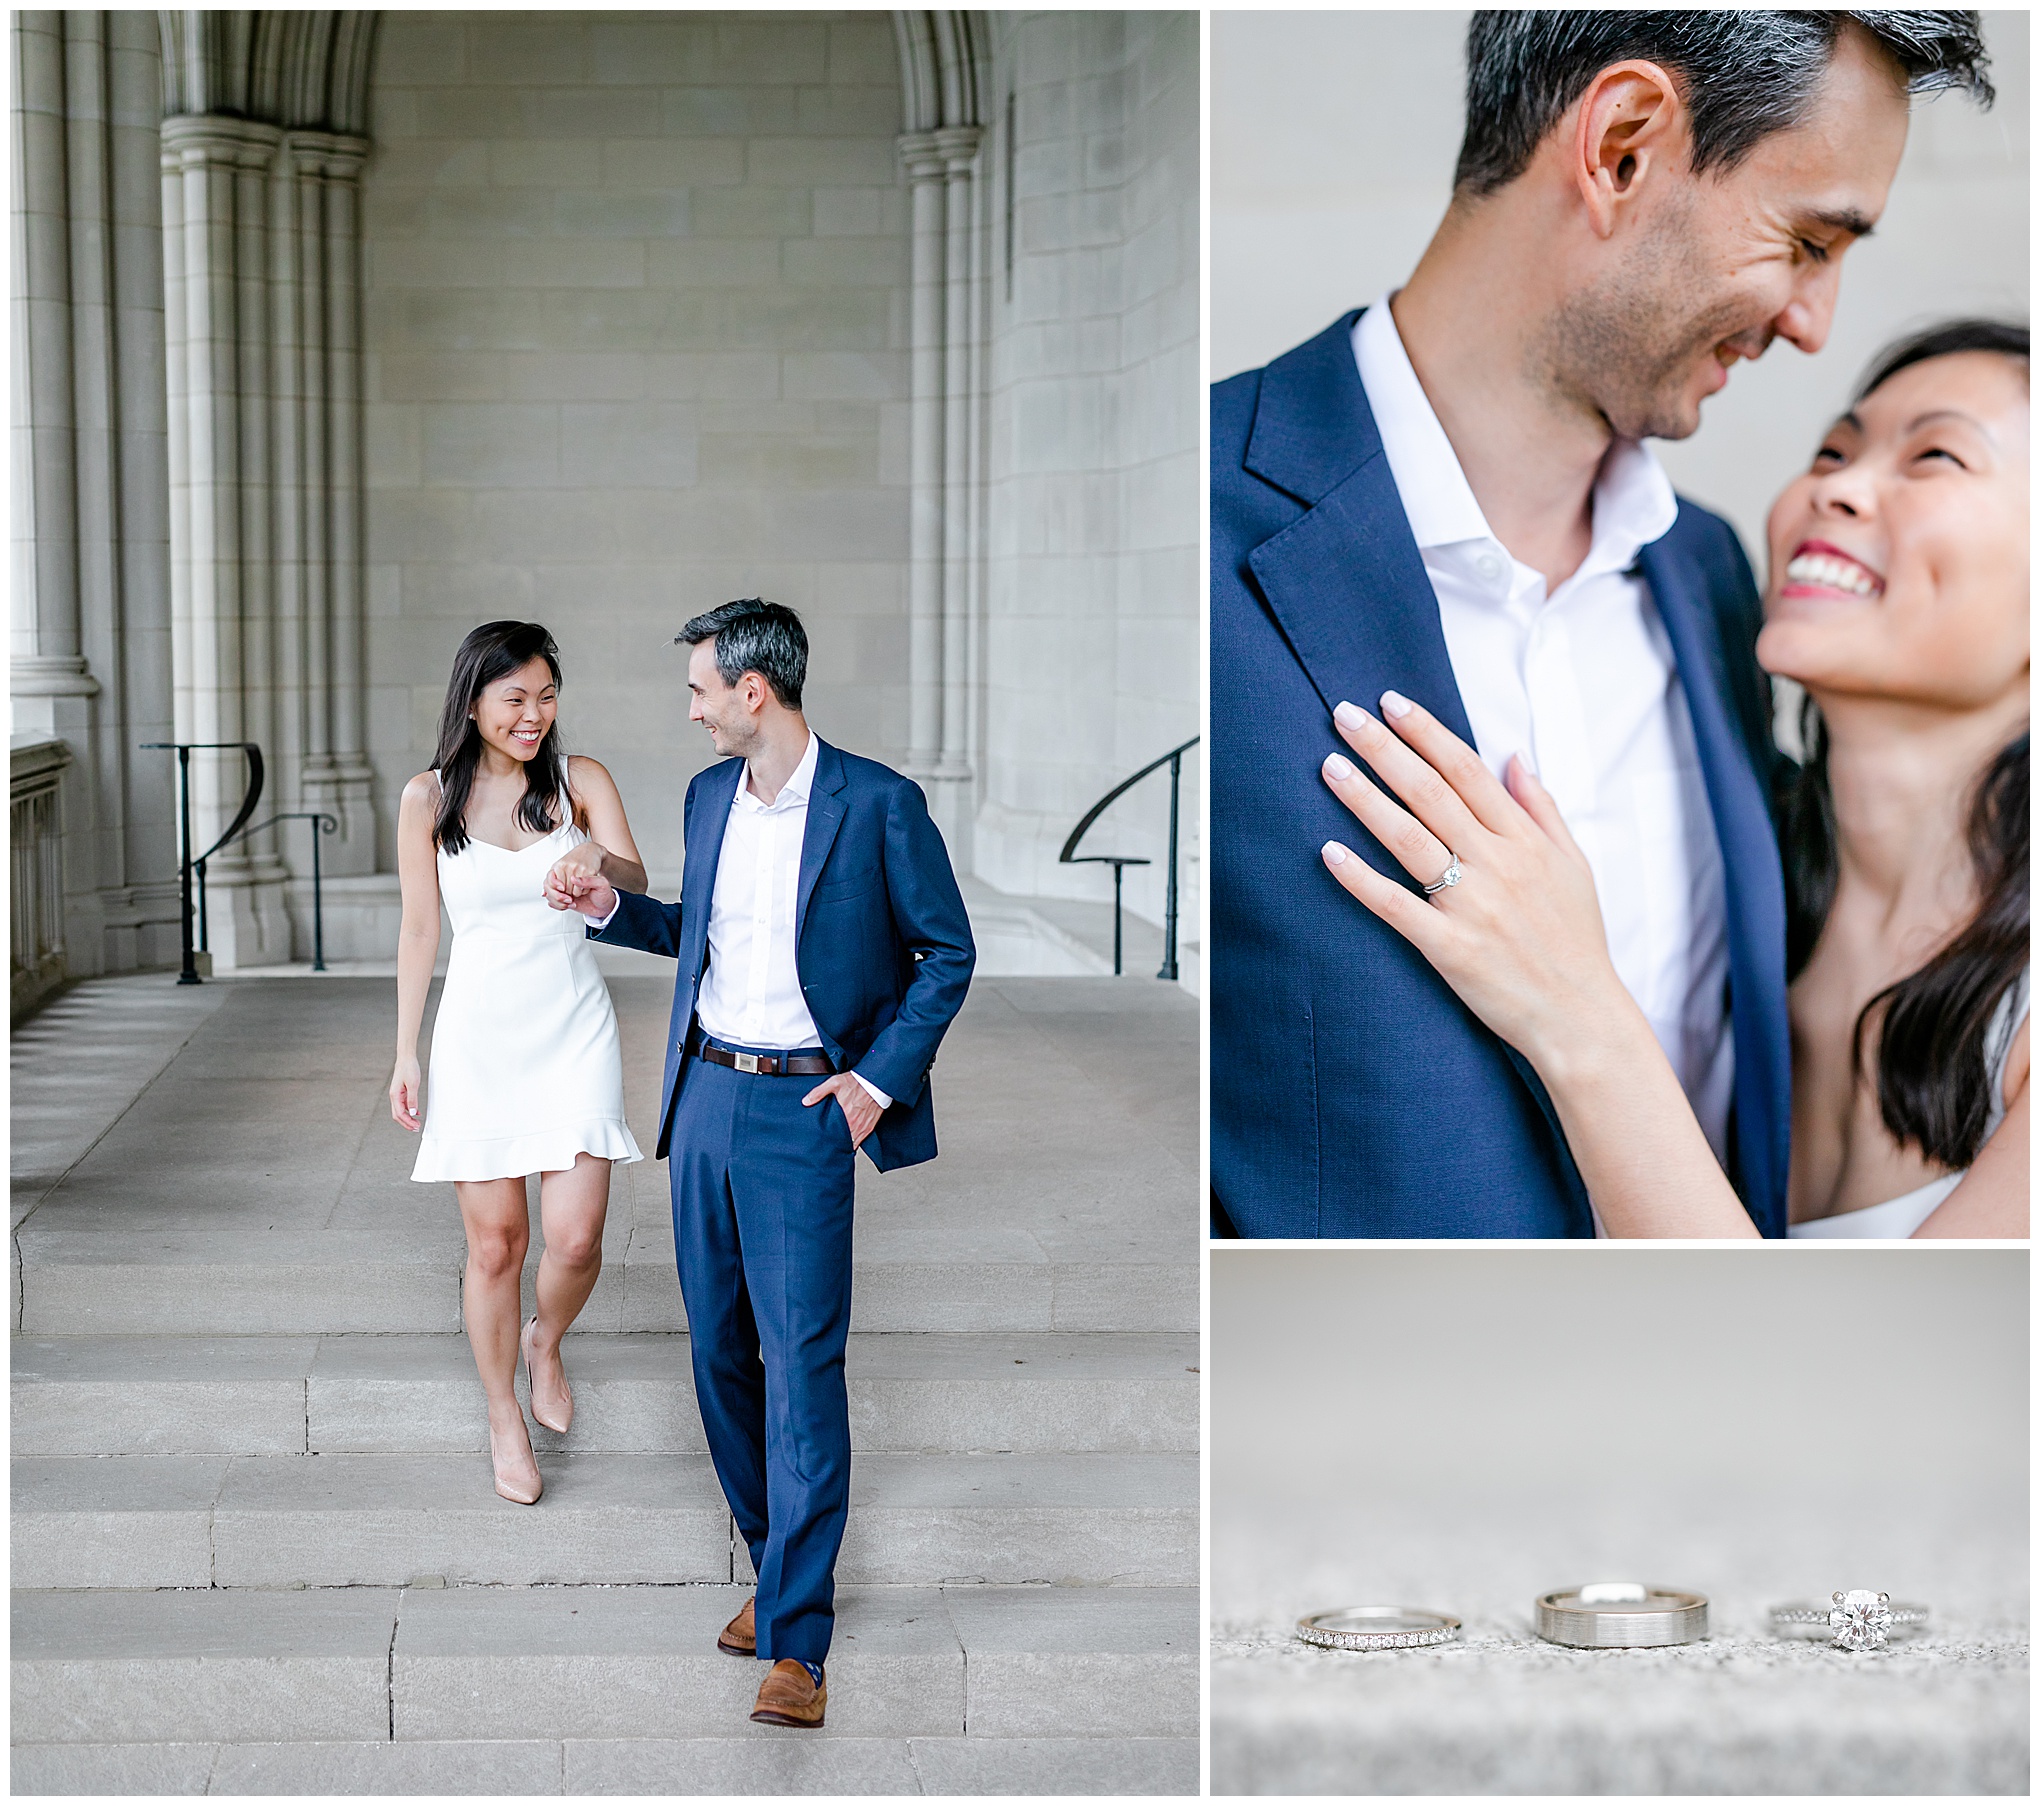 National Cathedral engagement session, National Cathedral engagement photos, DC engagement photos, Washington DC portraits, DC landmarks, summer portraits, elopement photos, DC elopement photographer, DC engagement photographer, classic engagement photos, natural light engagement photos, Rachel E.H. Photography, engaged couple, round solitaire engagement ring, couple walking down stairs